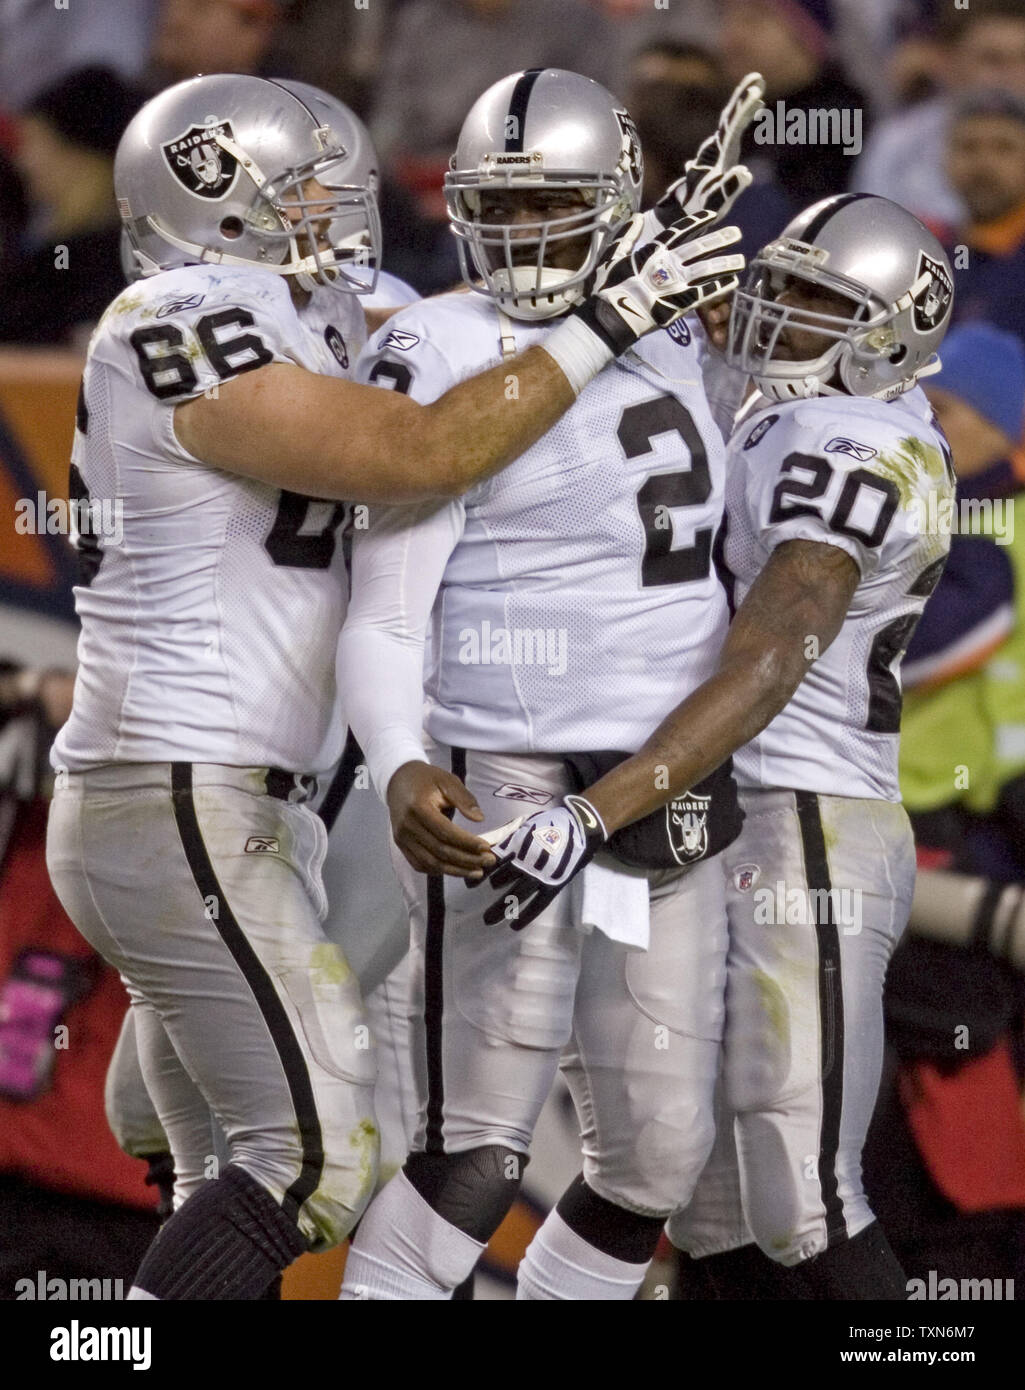 Oakland Raiders guard Cooper Carlisle (66) congratulates quarterback JaMarcus Russell (2) and running back Darren McFadden after McFadden's one-yard touchdown run in the fourth quarter against the Denver Broncos at Invesco Field at Mile High in Denver on November 23, 2008. Oakland defeated the AFC West division leader Denver Broncos 31-10.      (UPI Photo/ Gary C. Caskey) Stock Photo